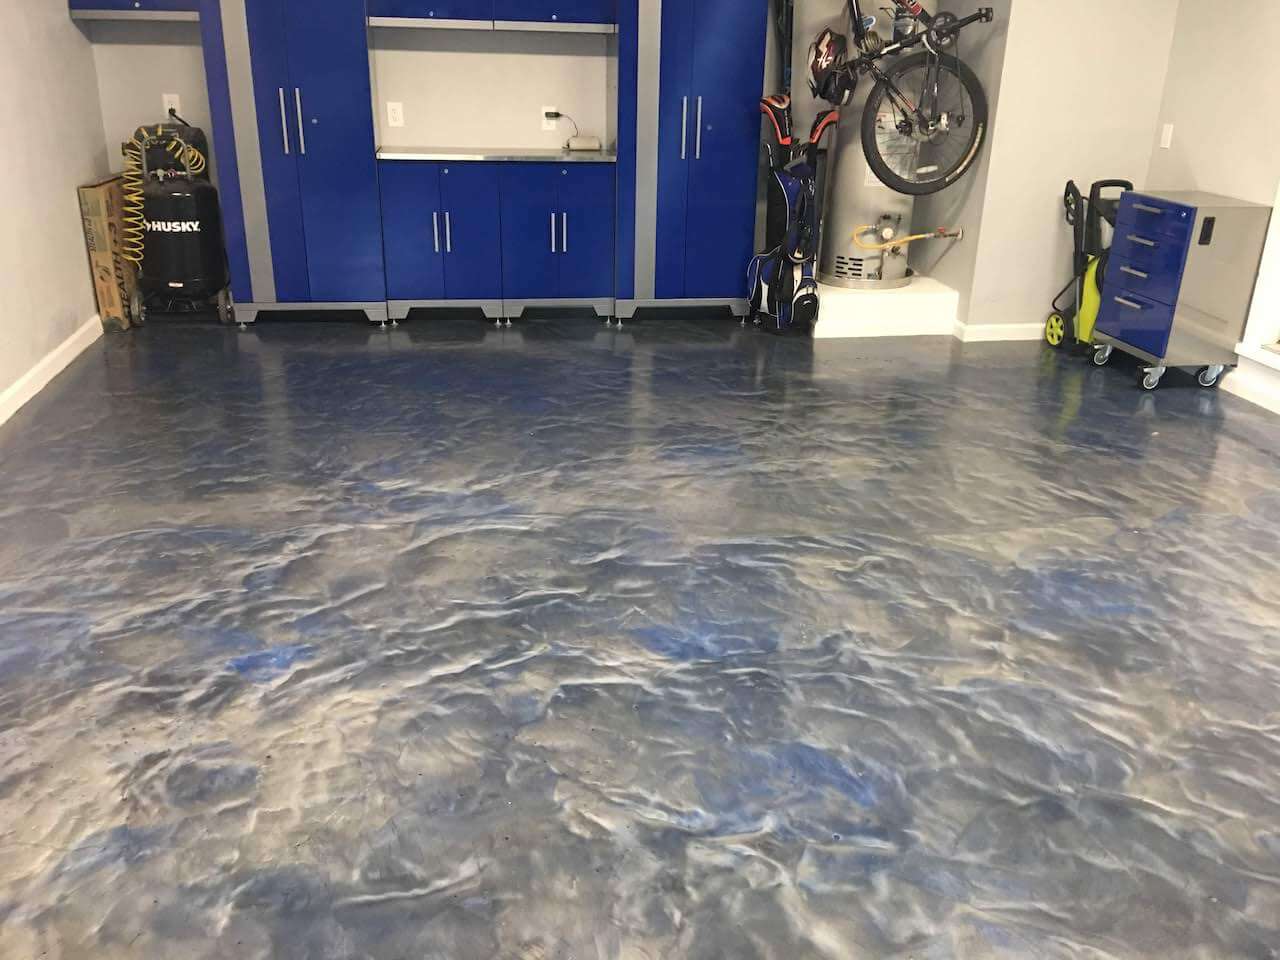 A truly unique epoxy garage floor.  The colors on this floor are blended in such a way as to create a wave-like design.  The garage also features premium blue garage cabinets.